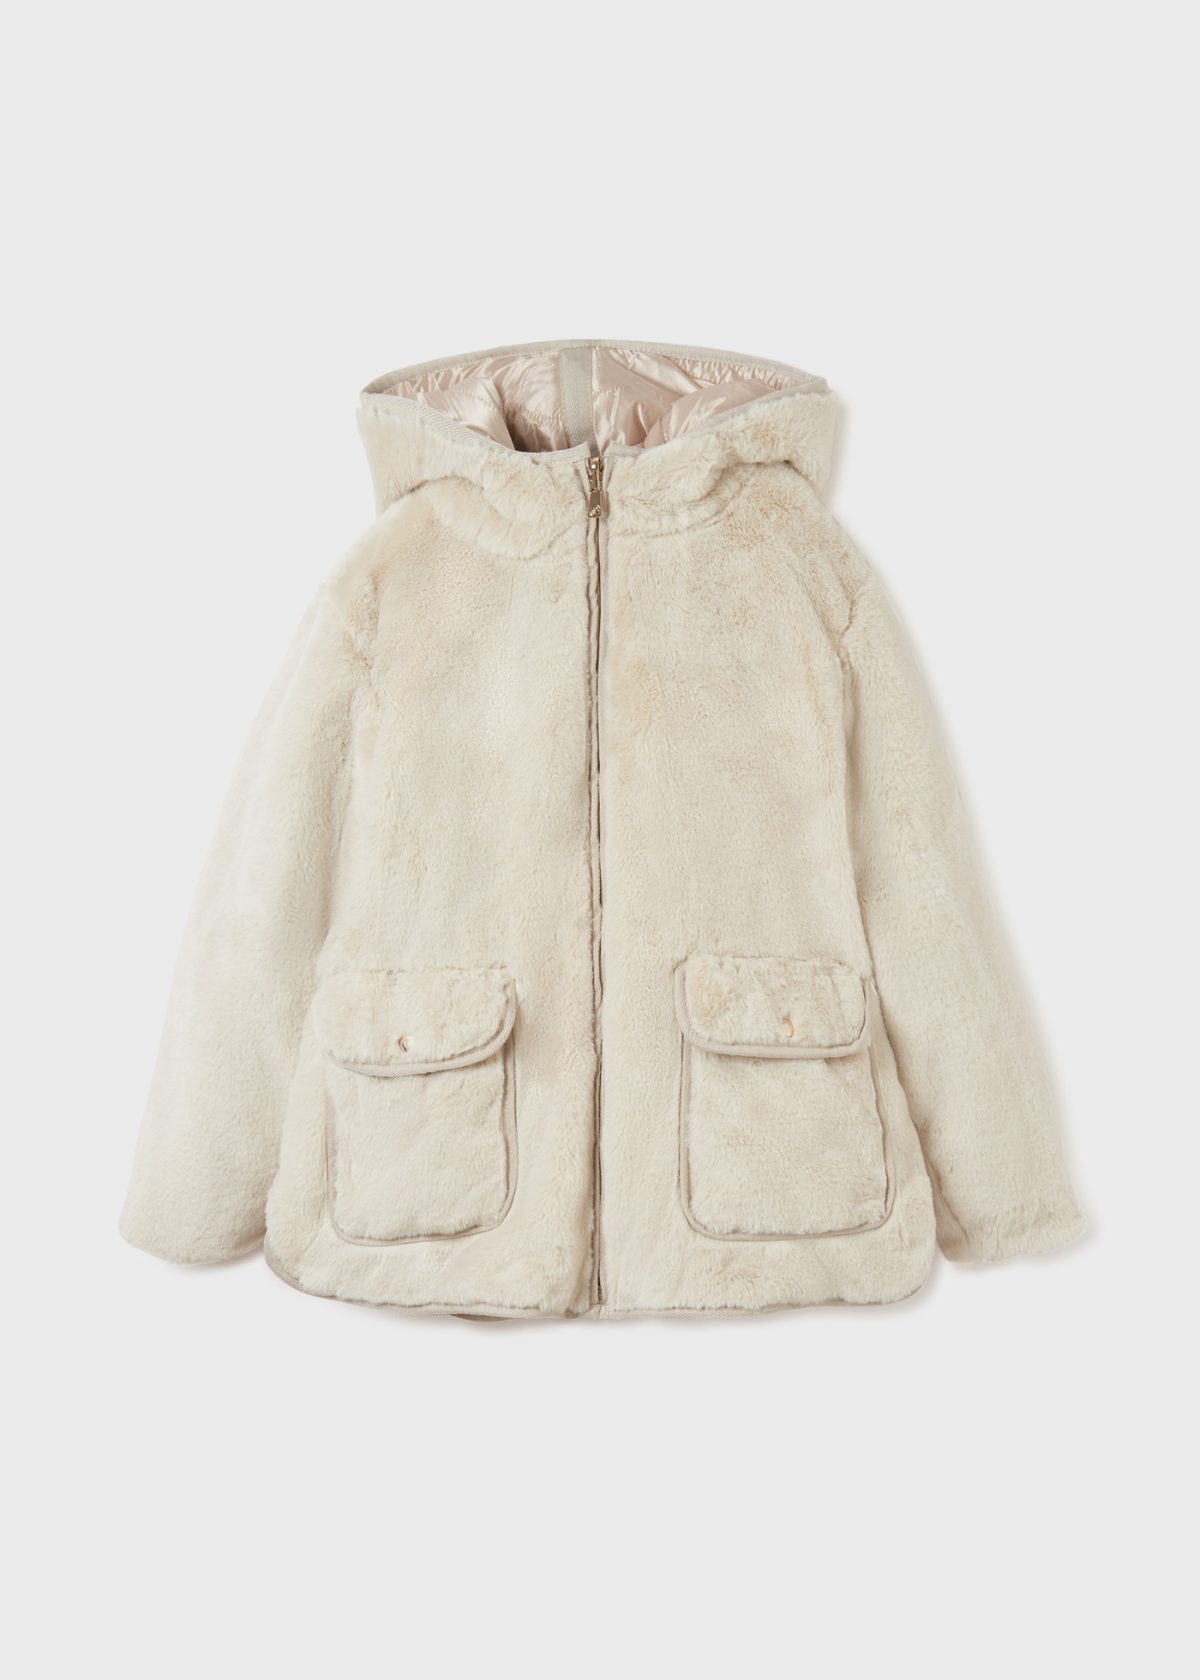 ECOFRIENDS girl’s double-sided jacket with fur Offers